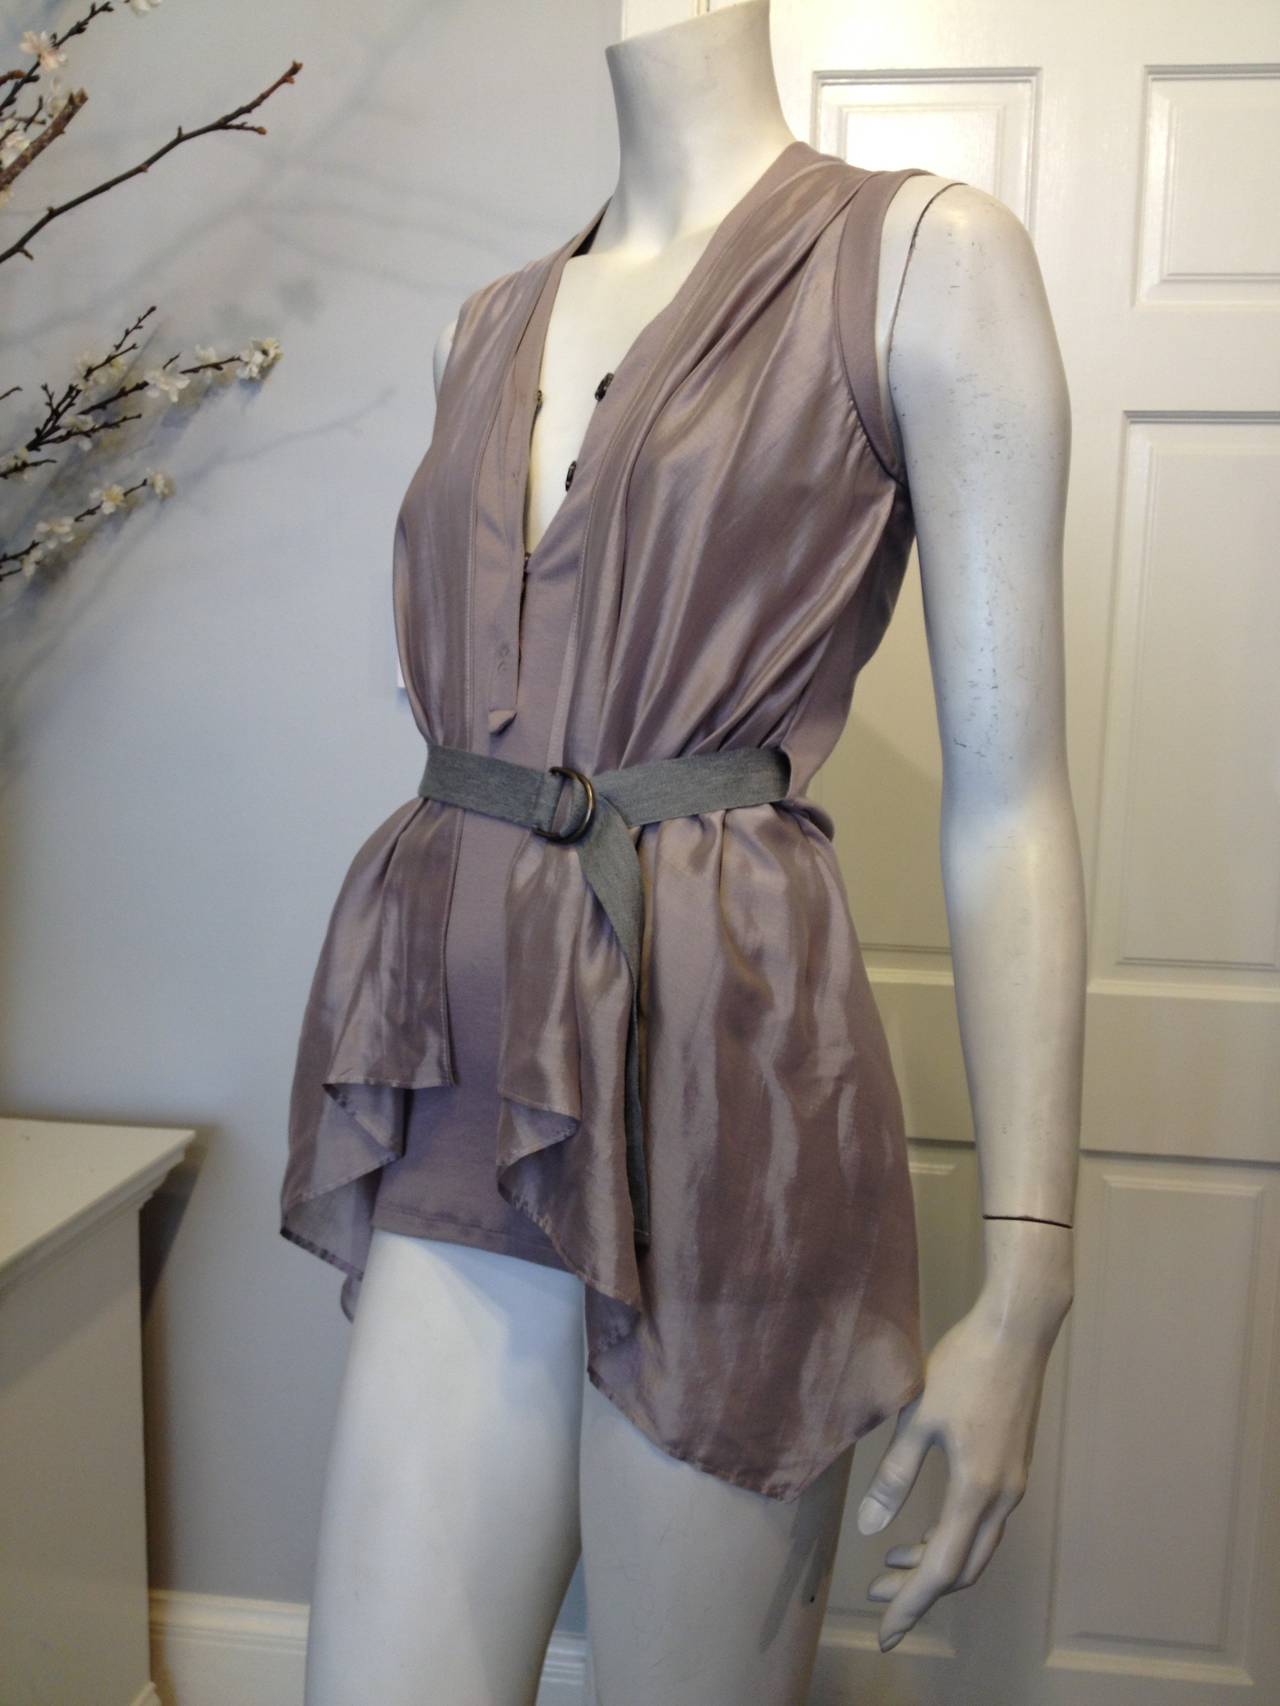 How ethereal! We love the way Brunello Cucinelli designs his pieces - they're interesting, but at the same time functional, timeless and so beautifully made. This piece features a finely ribbed tank with a snap placket, decorated with two layers of